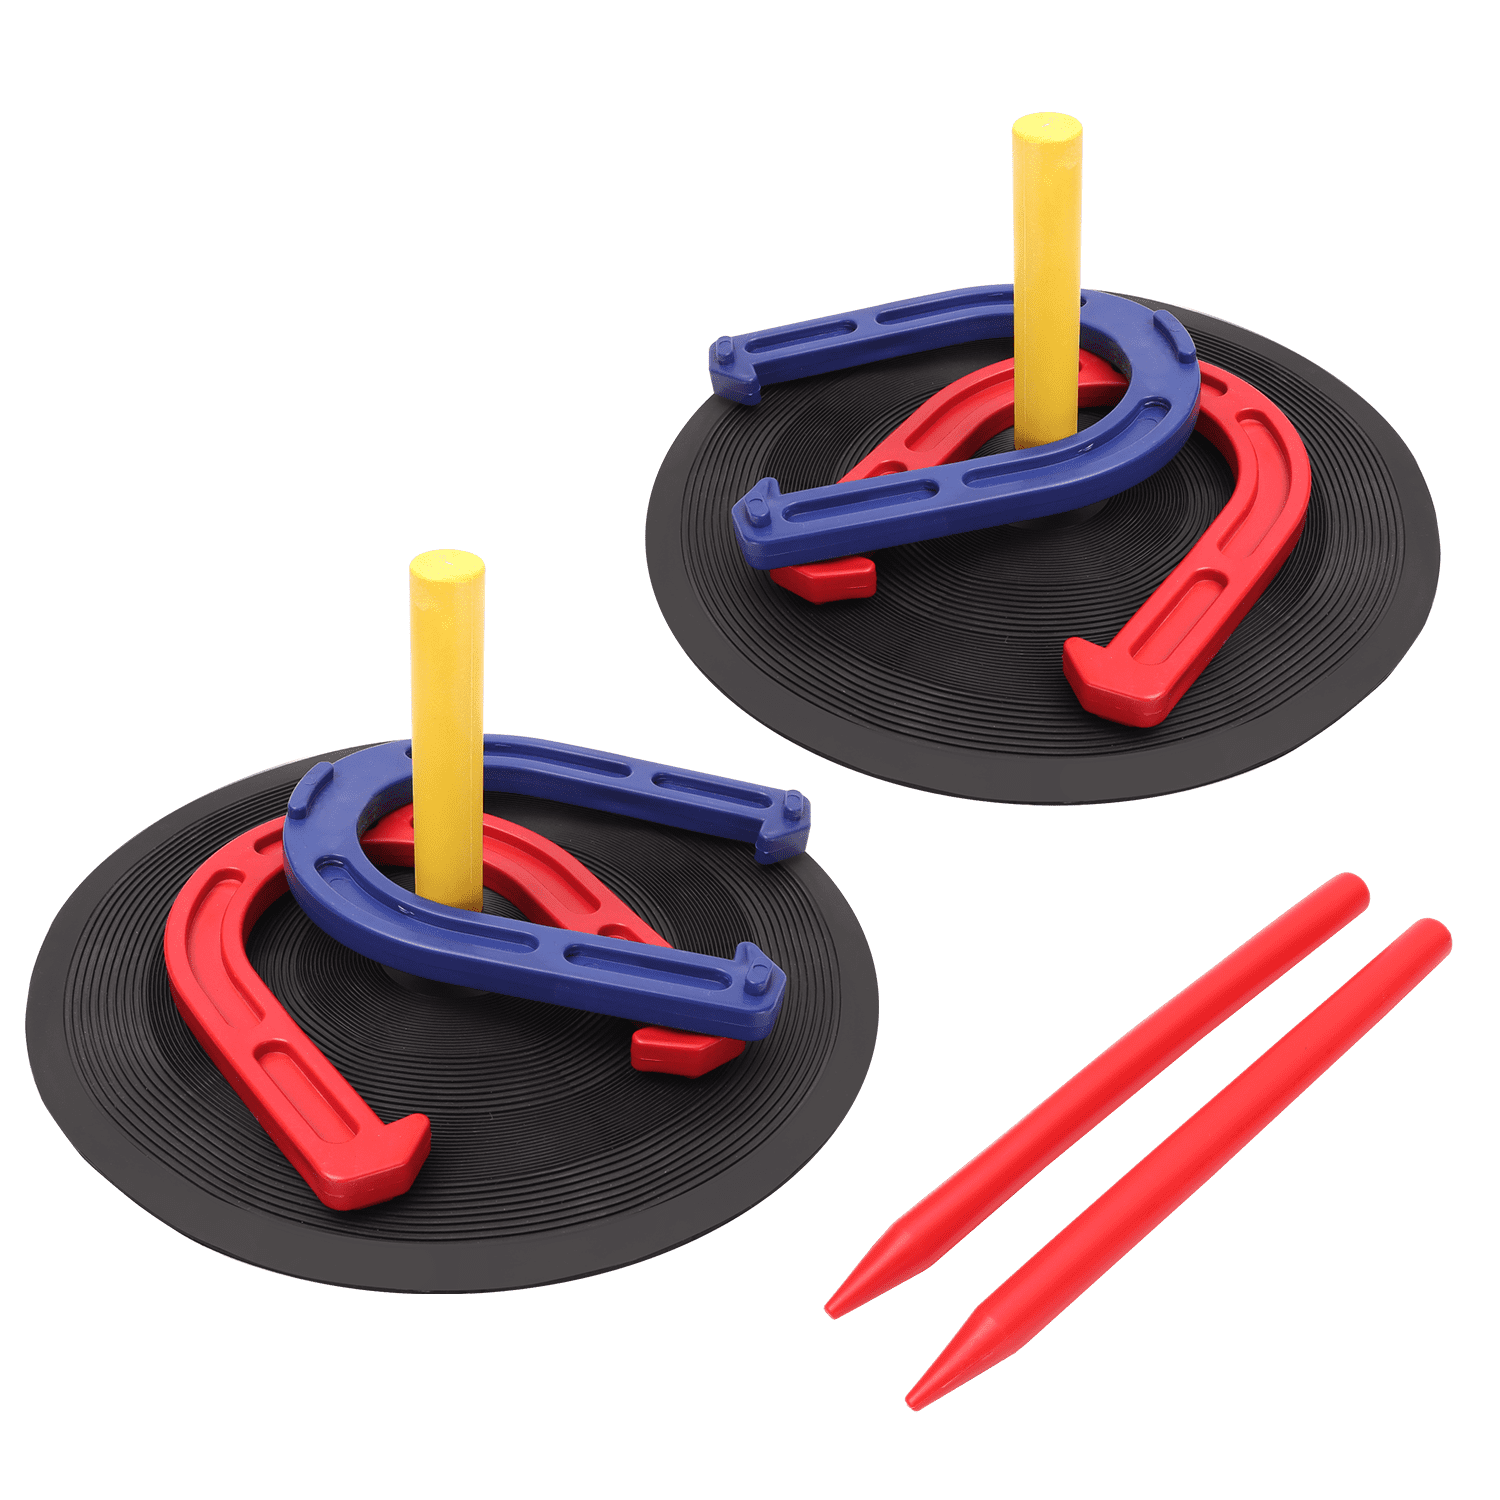 Gamie Horseshoes Tossing Game - Set Includes 4 Horse Shoes and 2 Stakes -  Durable Plastic - Outdoor Activities for Family, Kids and Adults - Fun  Activity for Party, Camping, Yard, Lawn